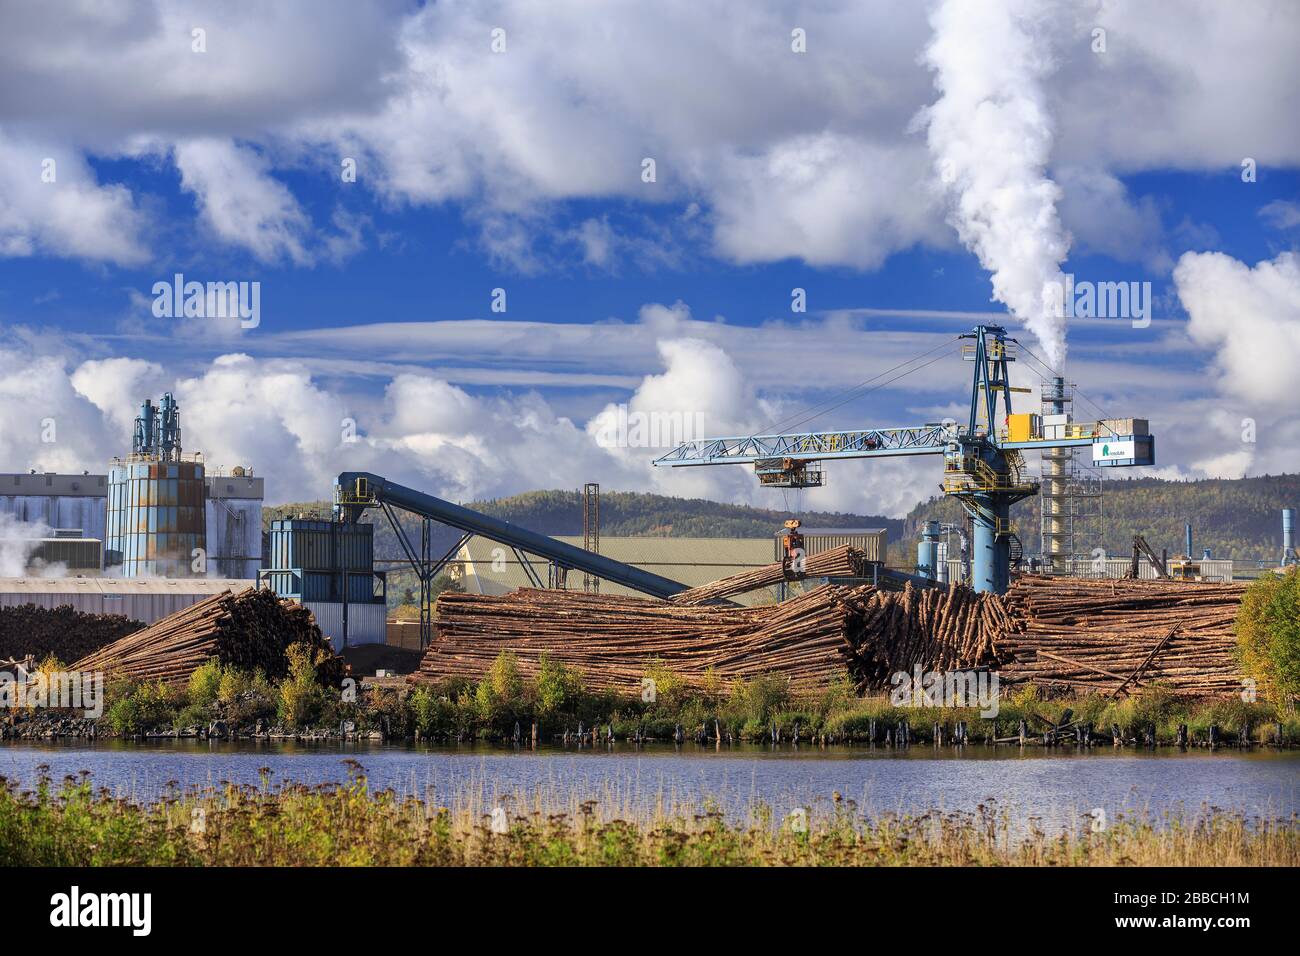 Pulp and Paper Mill, Thunder Bay, Ontario, Canada Stock Photo